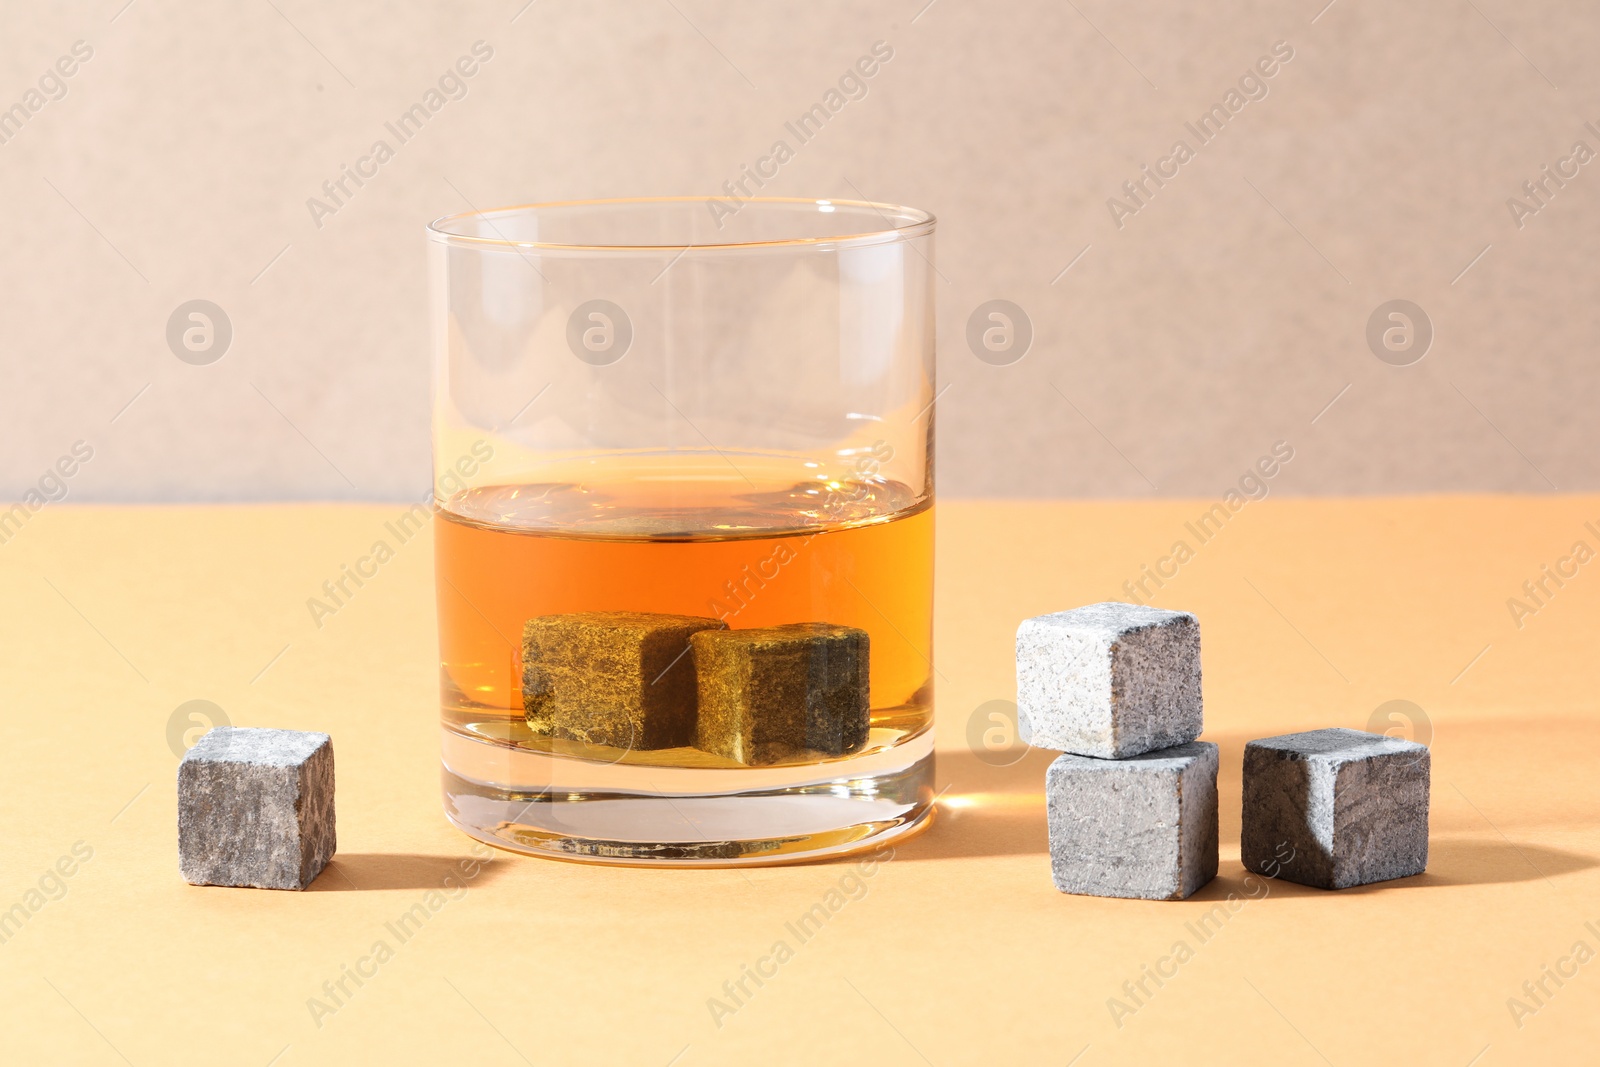 Photo of Whiskey stones and drink in glass on orange table, closeup